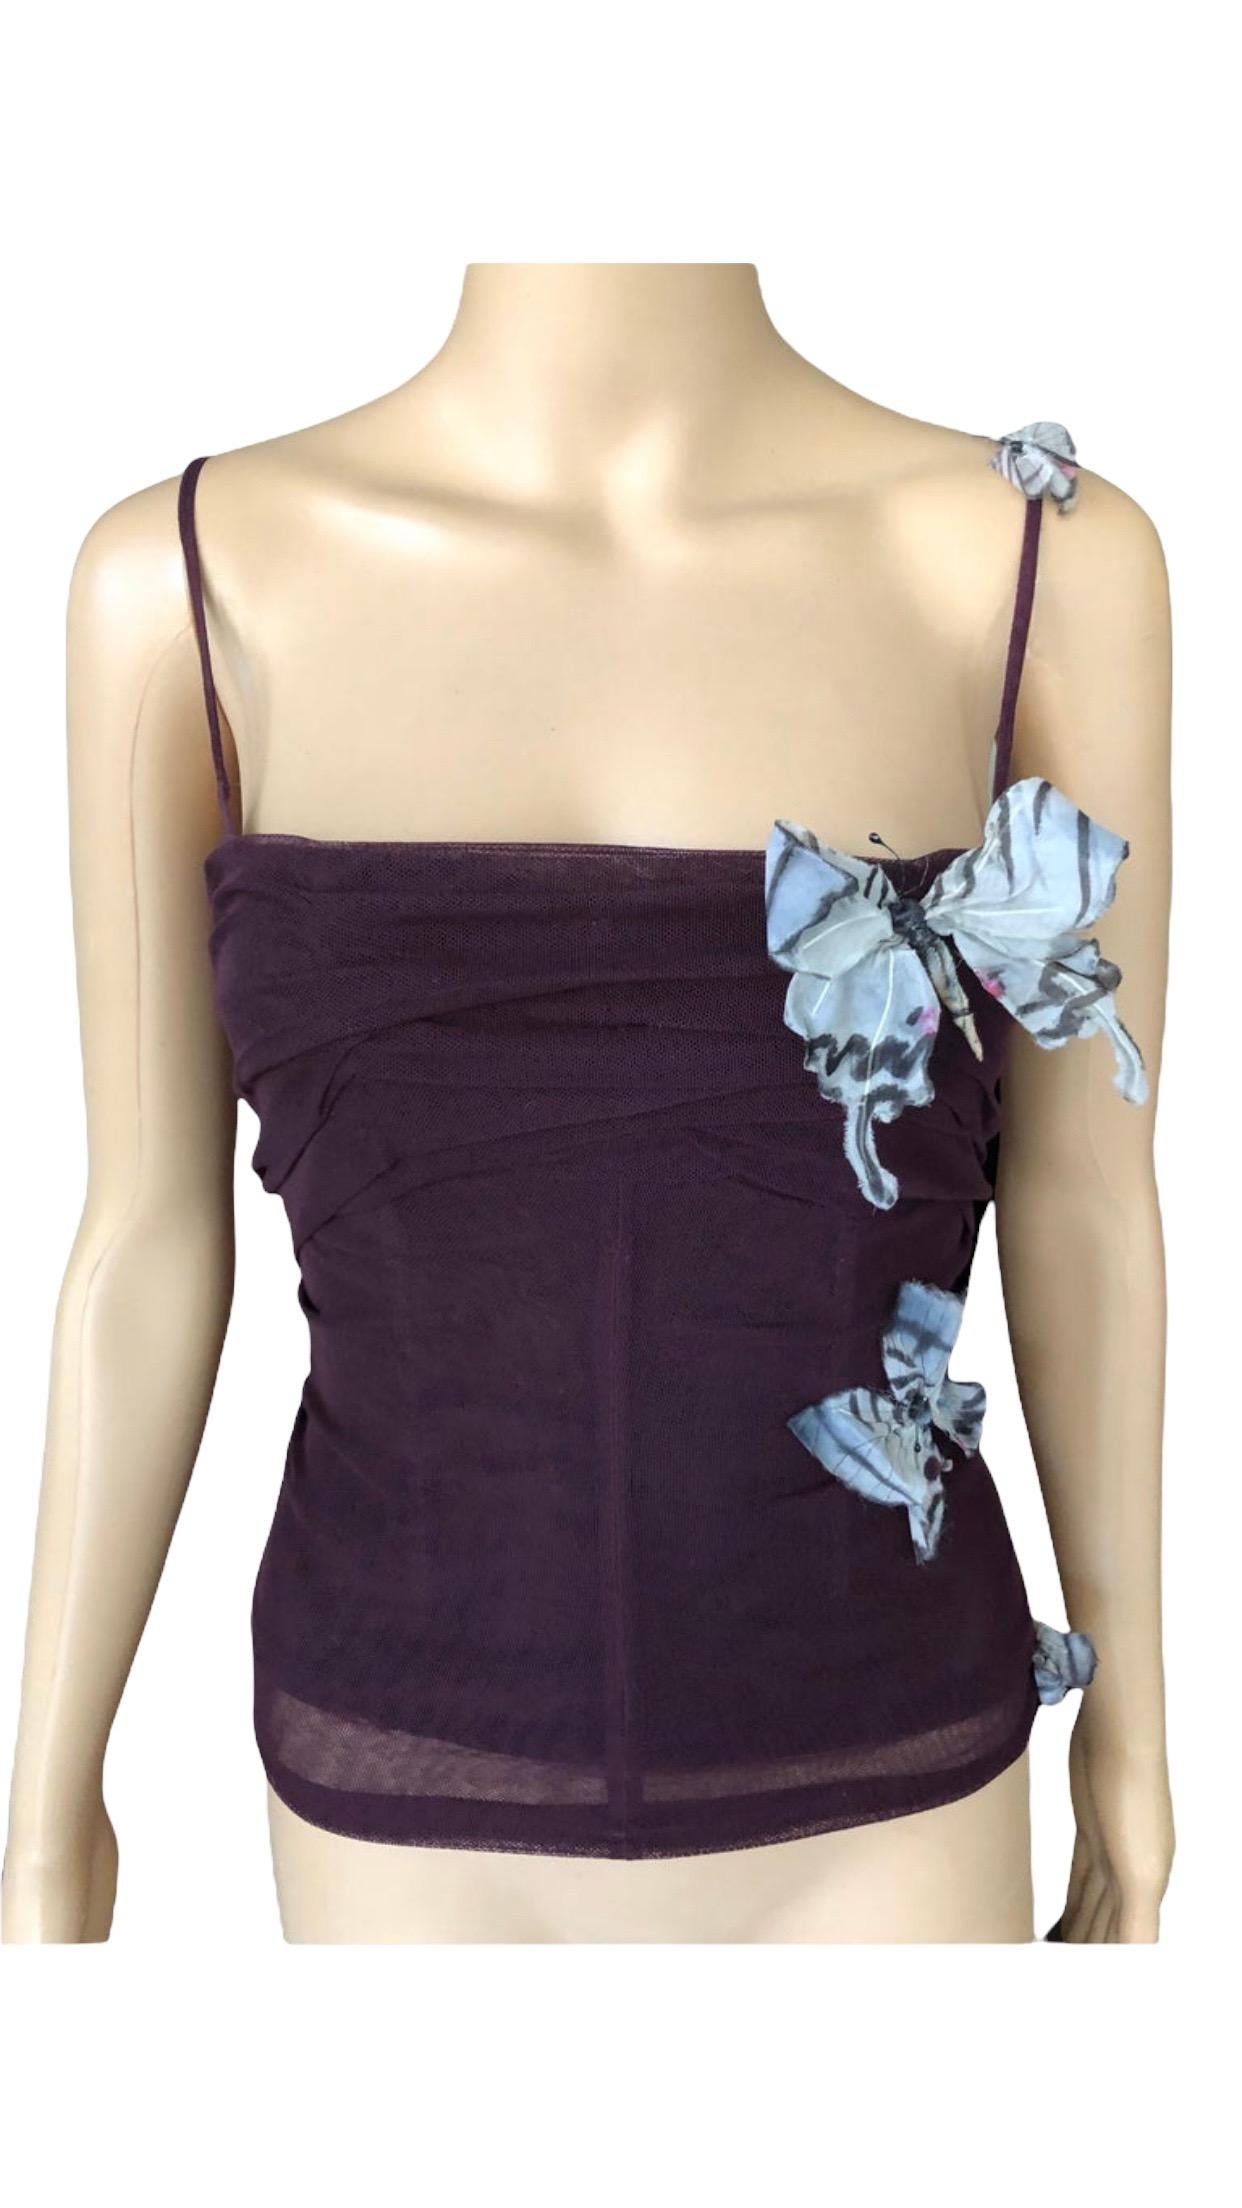 Dolce & Gabbana S/S 1998 Vintage Stromboli Collection Butterfly Top 1